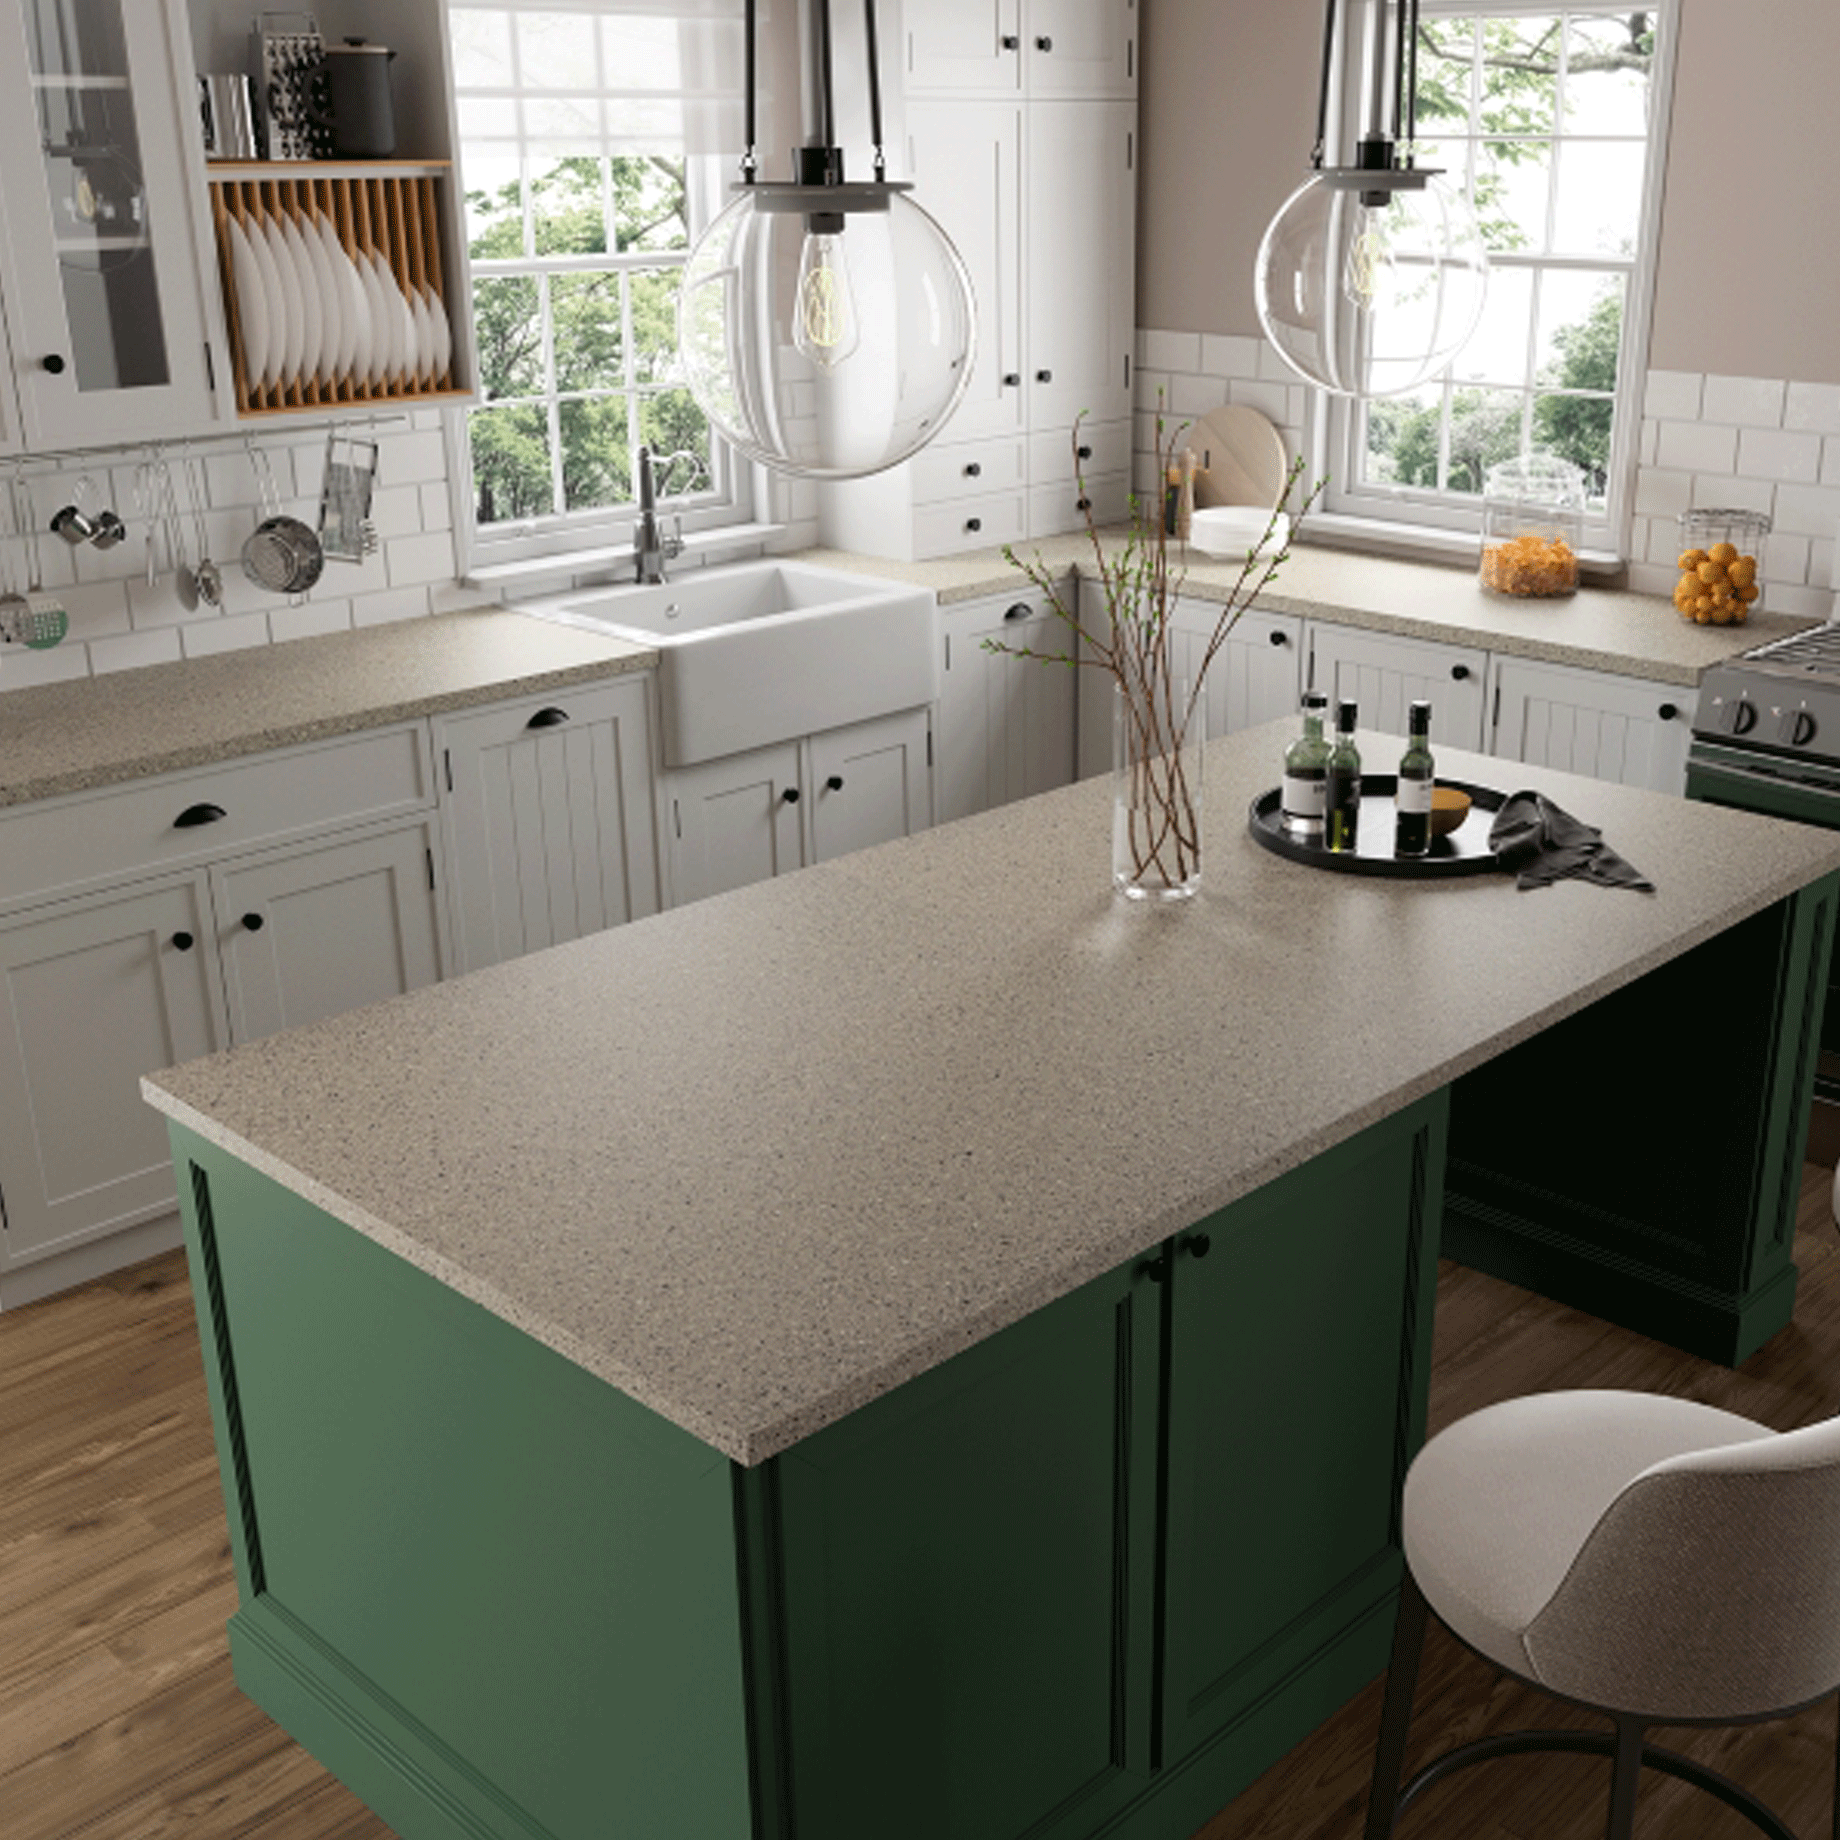 Solid Surface countertops